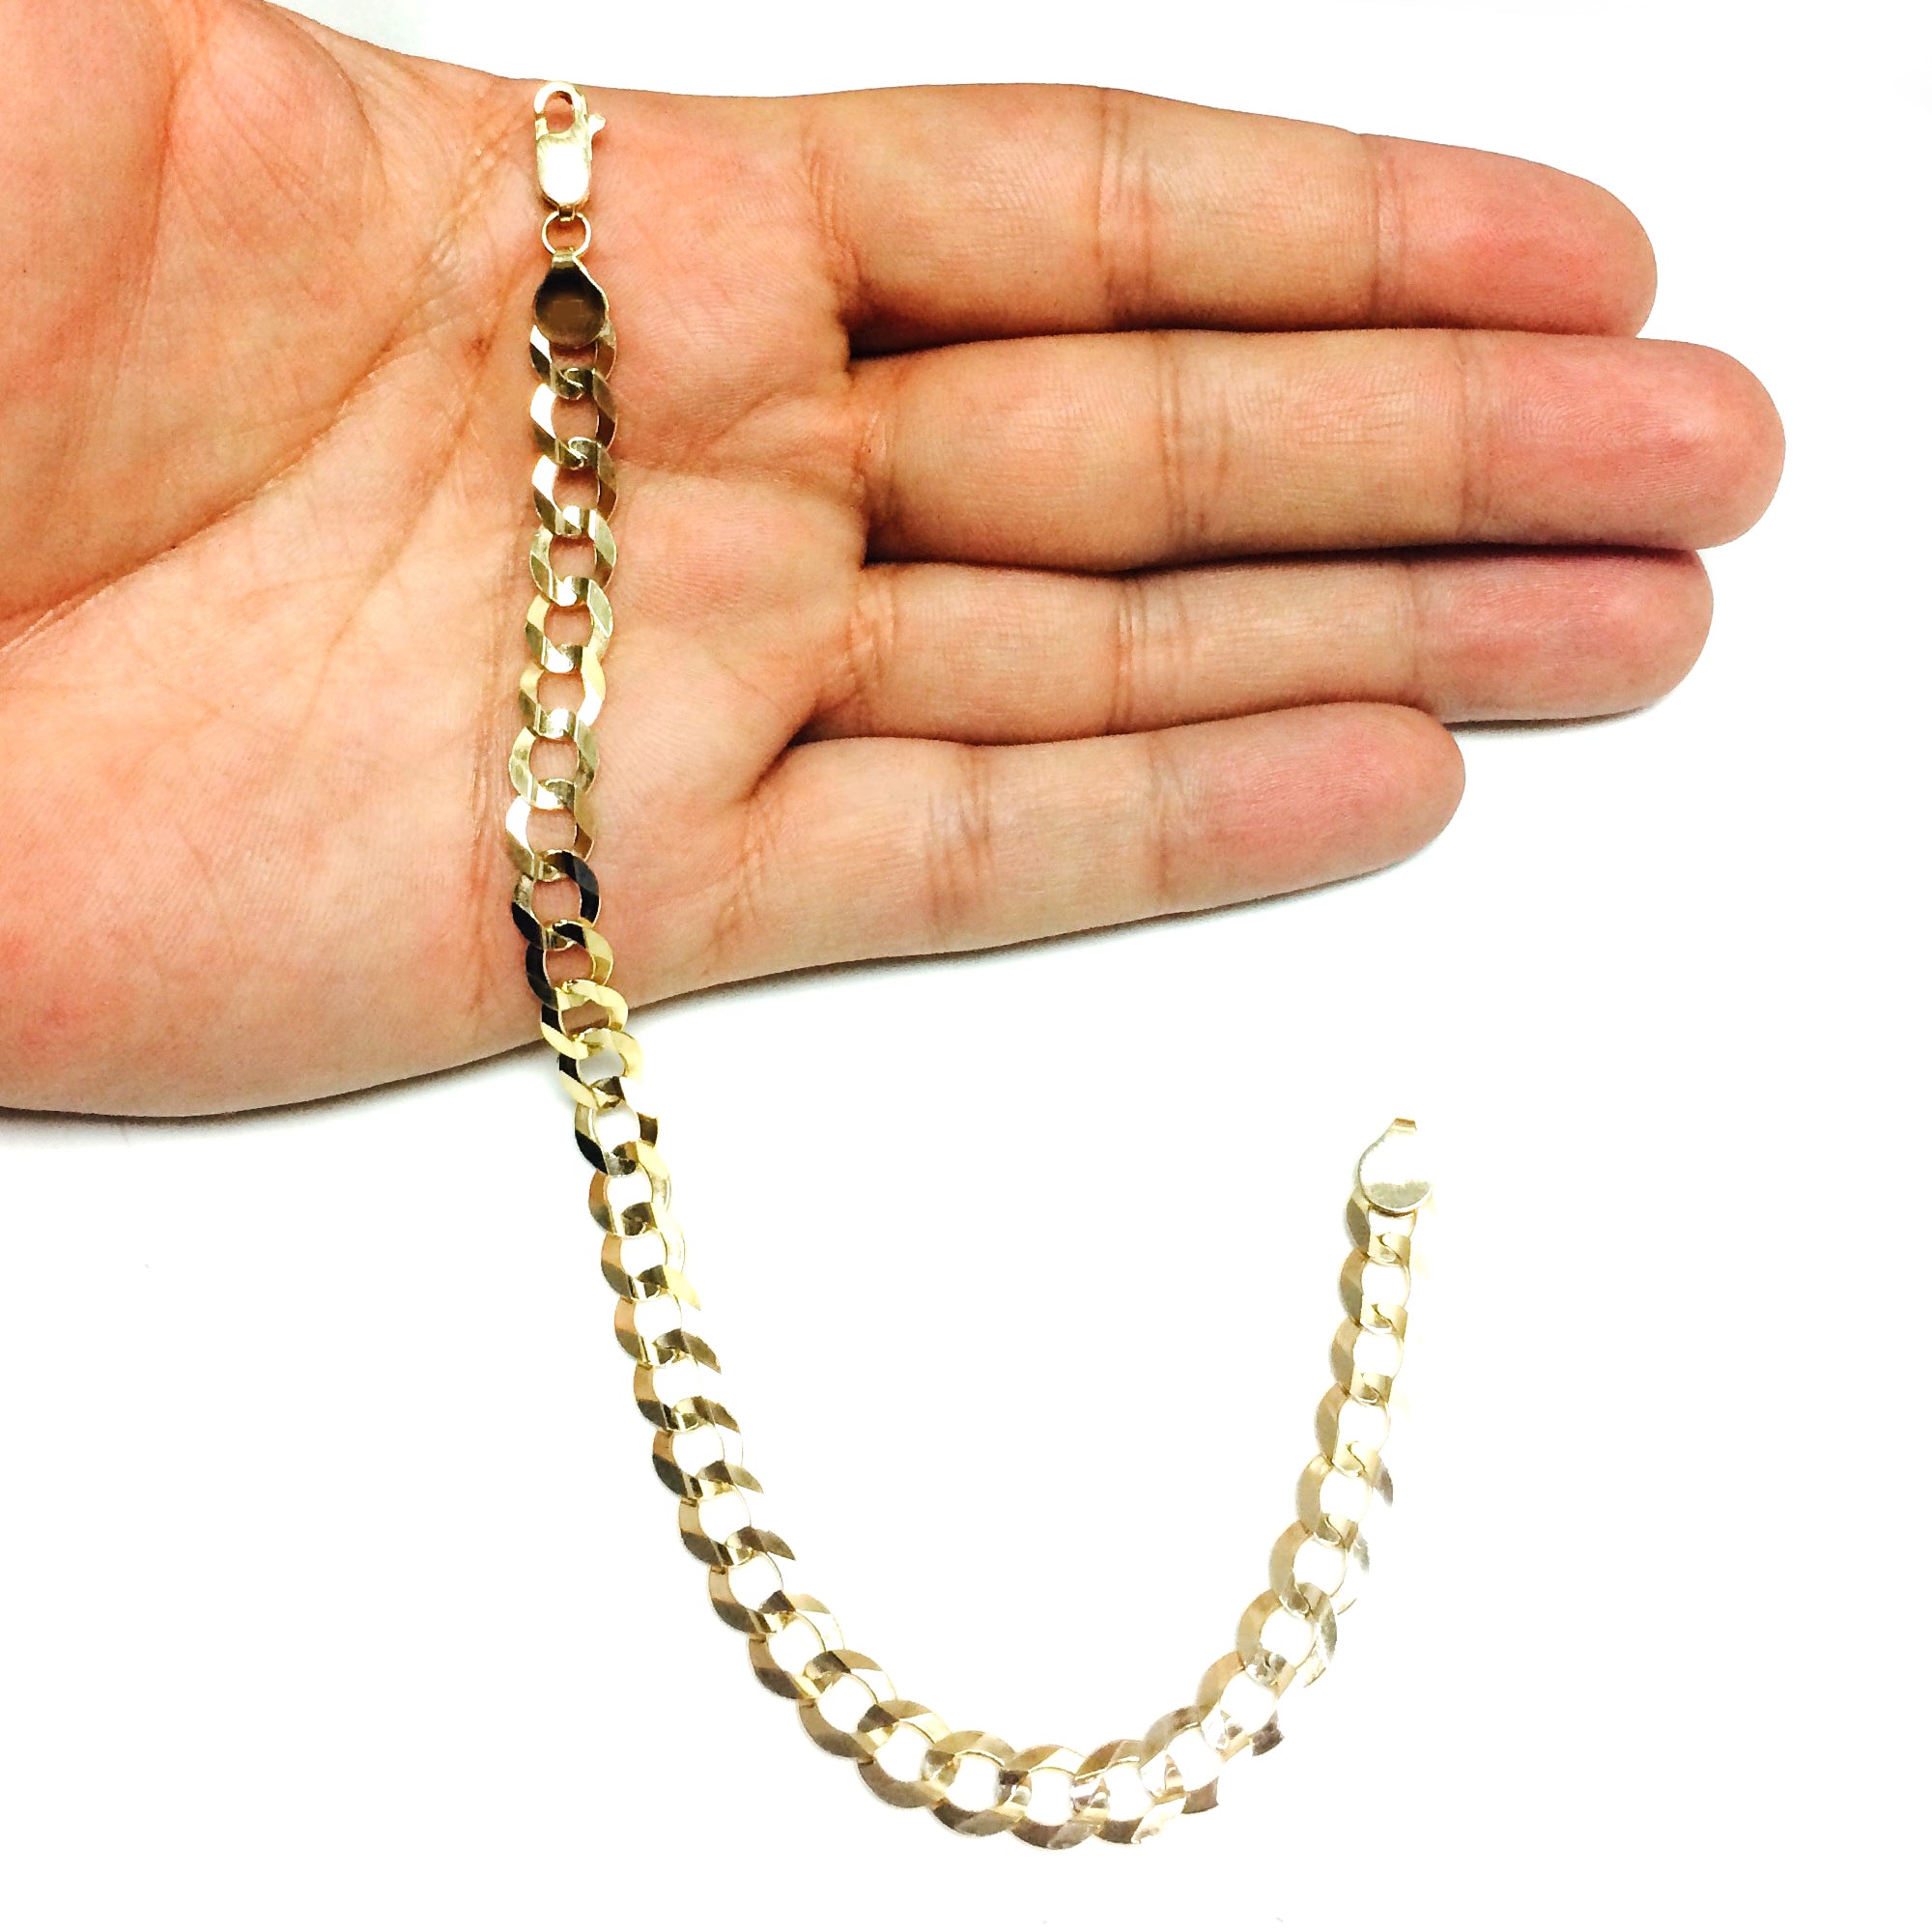 14k Yellow Solid Gold Comfort Curb Chain Bracelet, 7.0mm, 8.5" fine designer jewelry for men and women